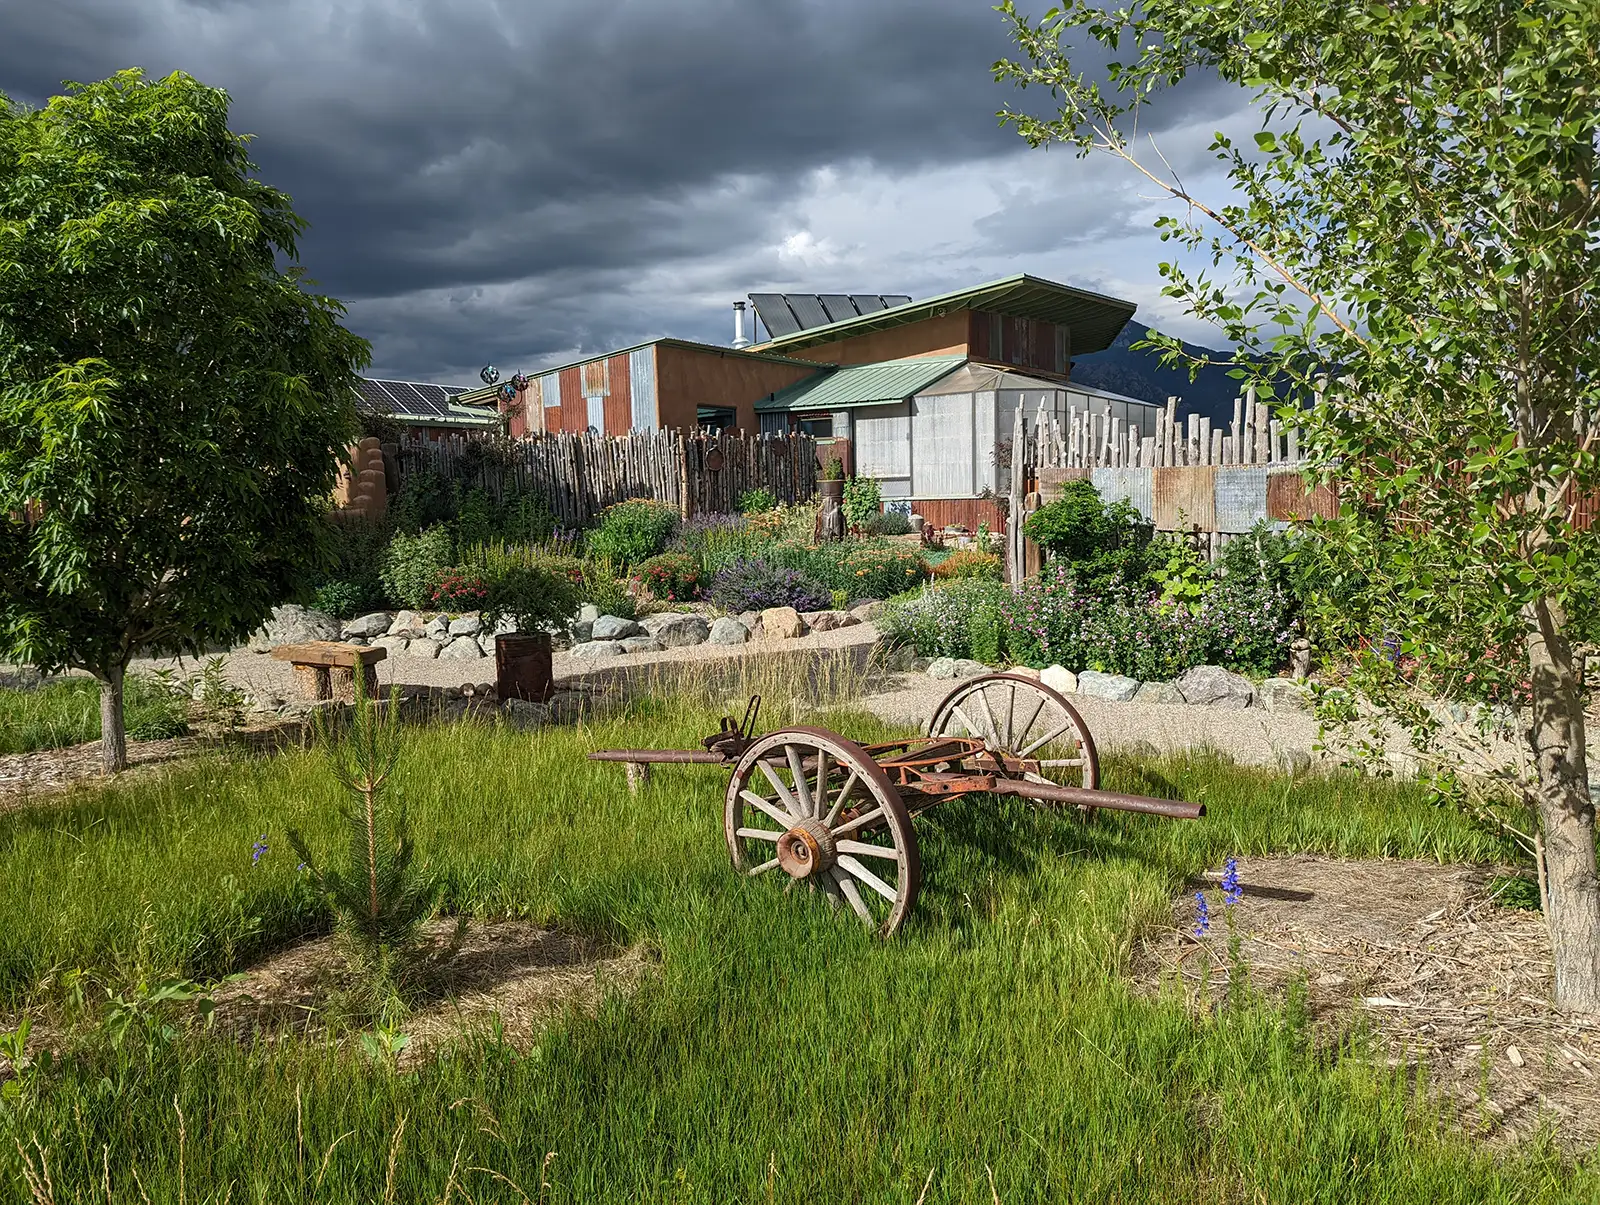 during the seasons that flowers aren't blooming, Dan's landscape design still have interesting things to look at, such as this old wagon, a birch fence and a house built from all re-used and re-cycled materials.